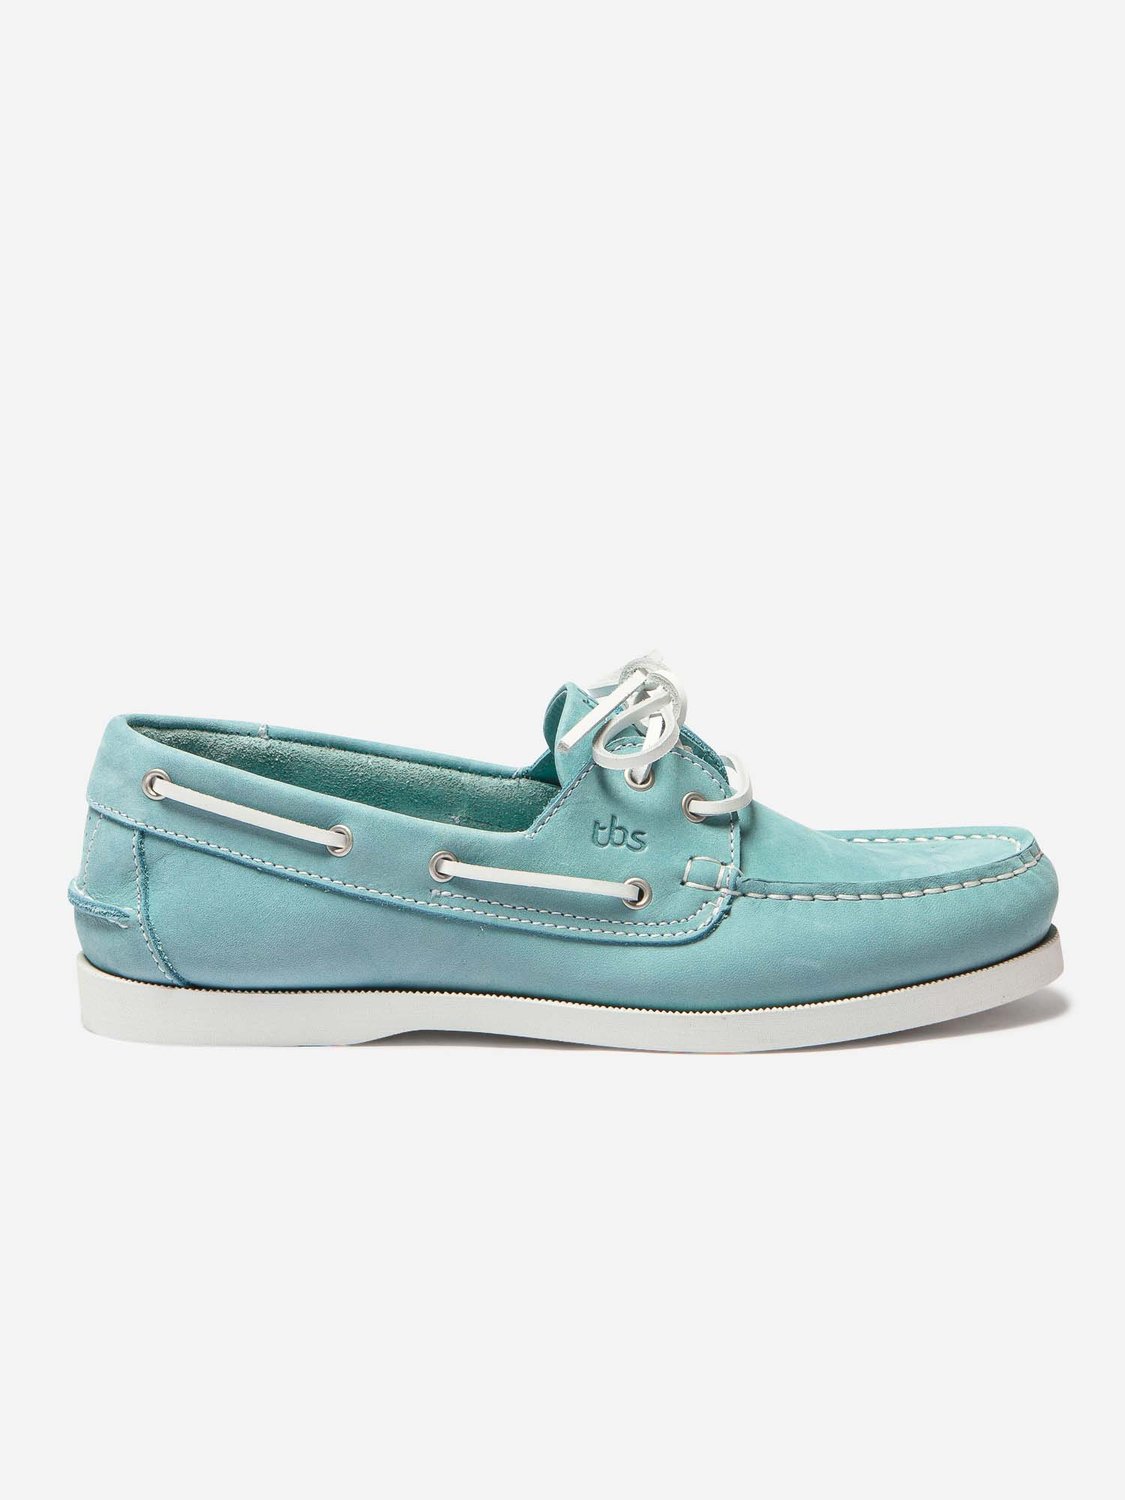 Chaussures Bateau Homme Cuir Nubuck Turquoise